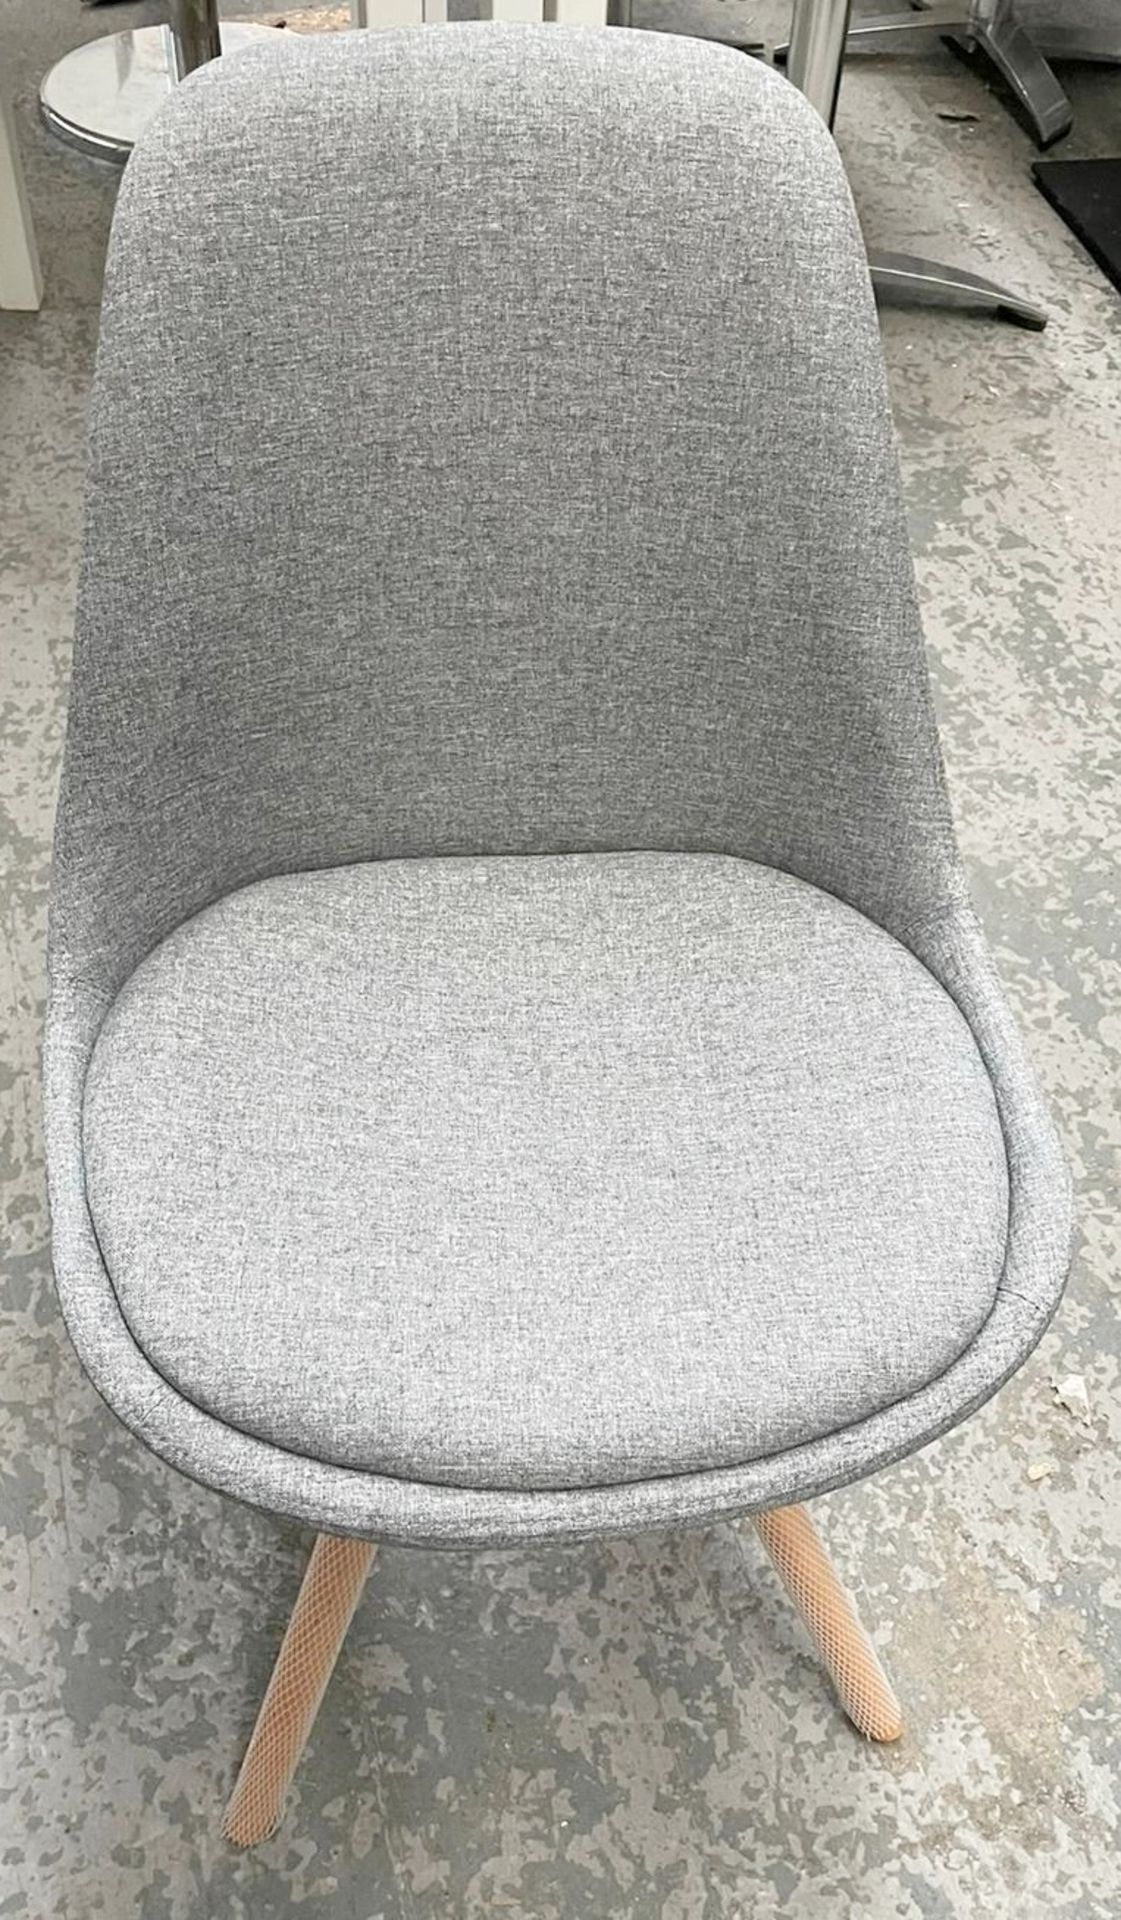 4 x Upholstered Turner Chair In Grey- Dimensions: 86(h) x 50(w) x 40(d) cm - Brand New Unboxed - Image 2 of 6